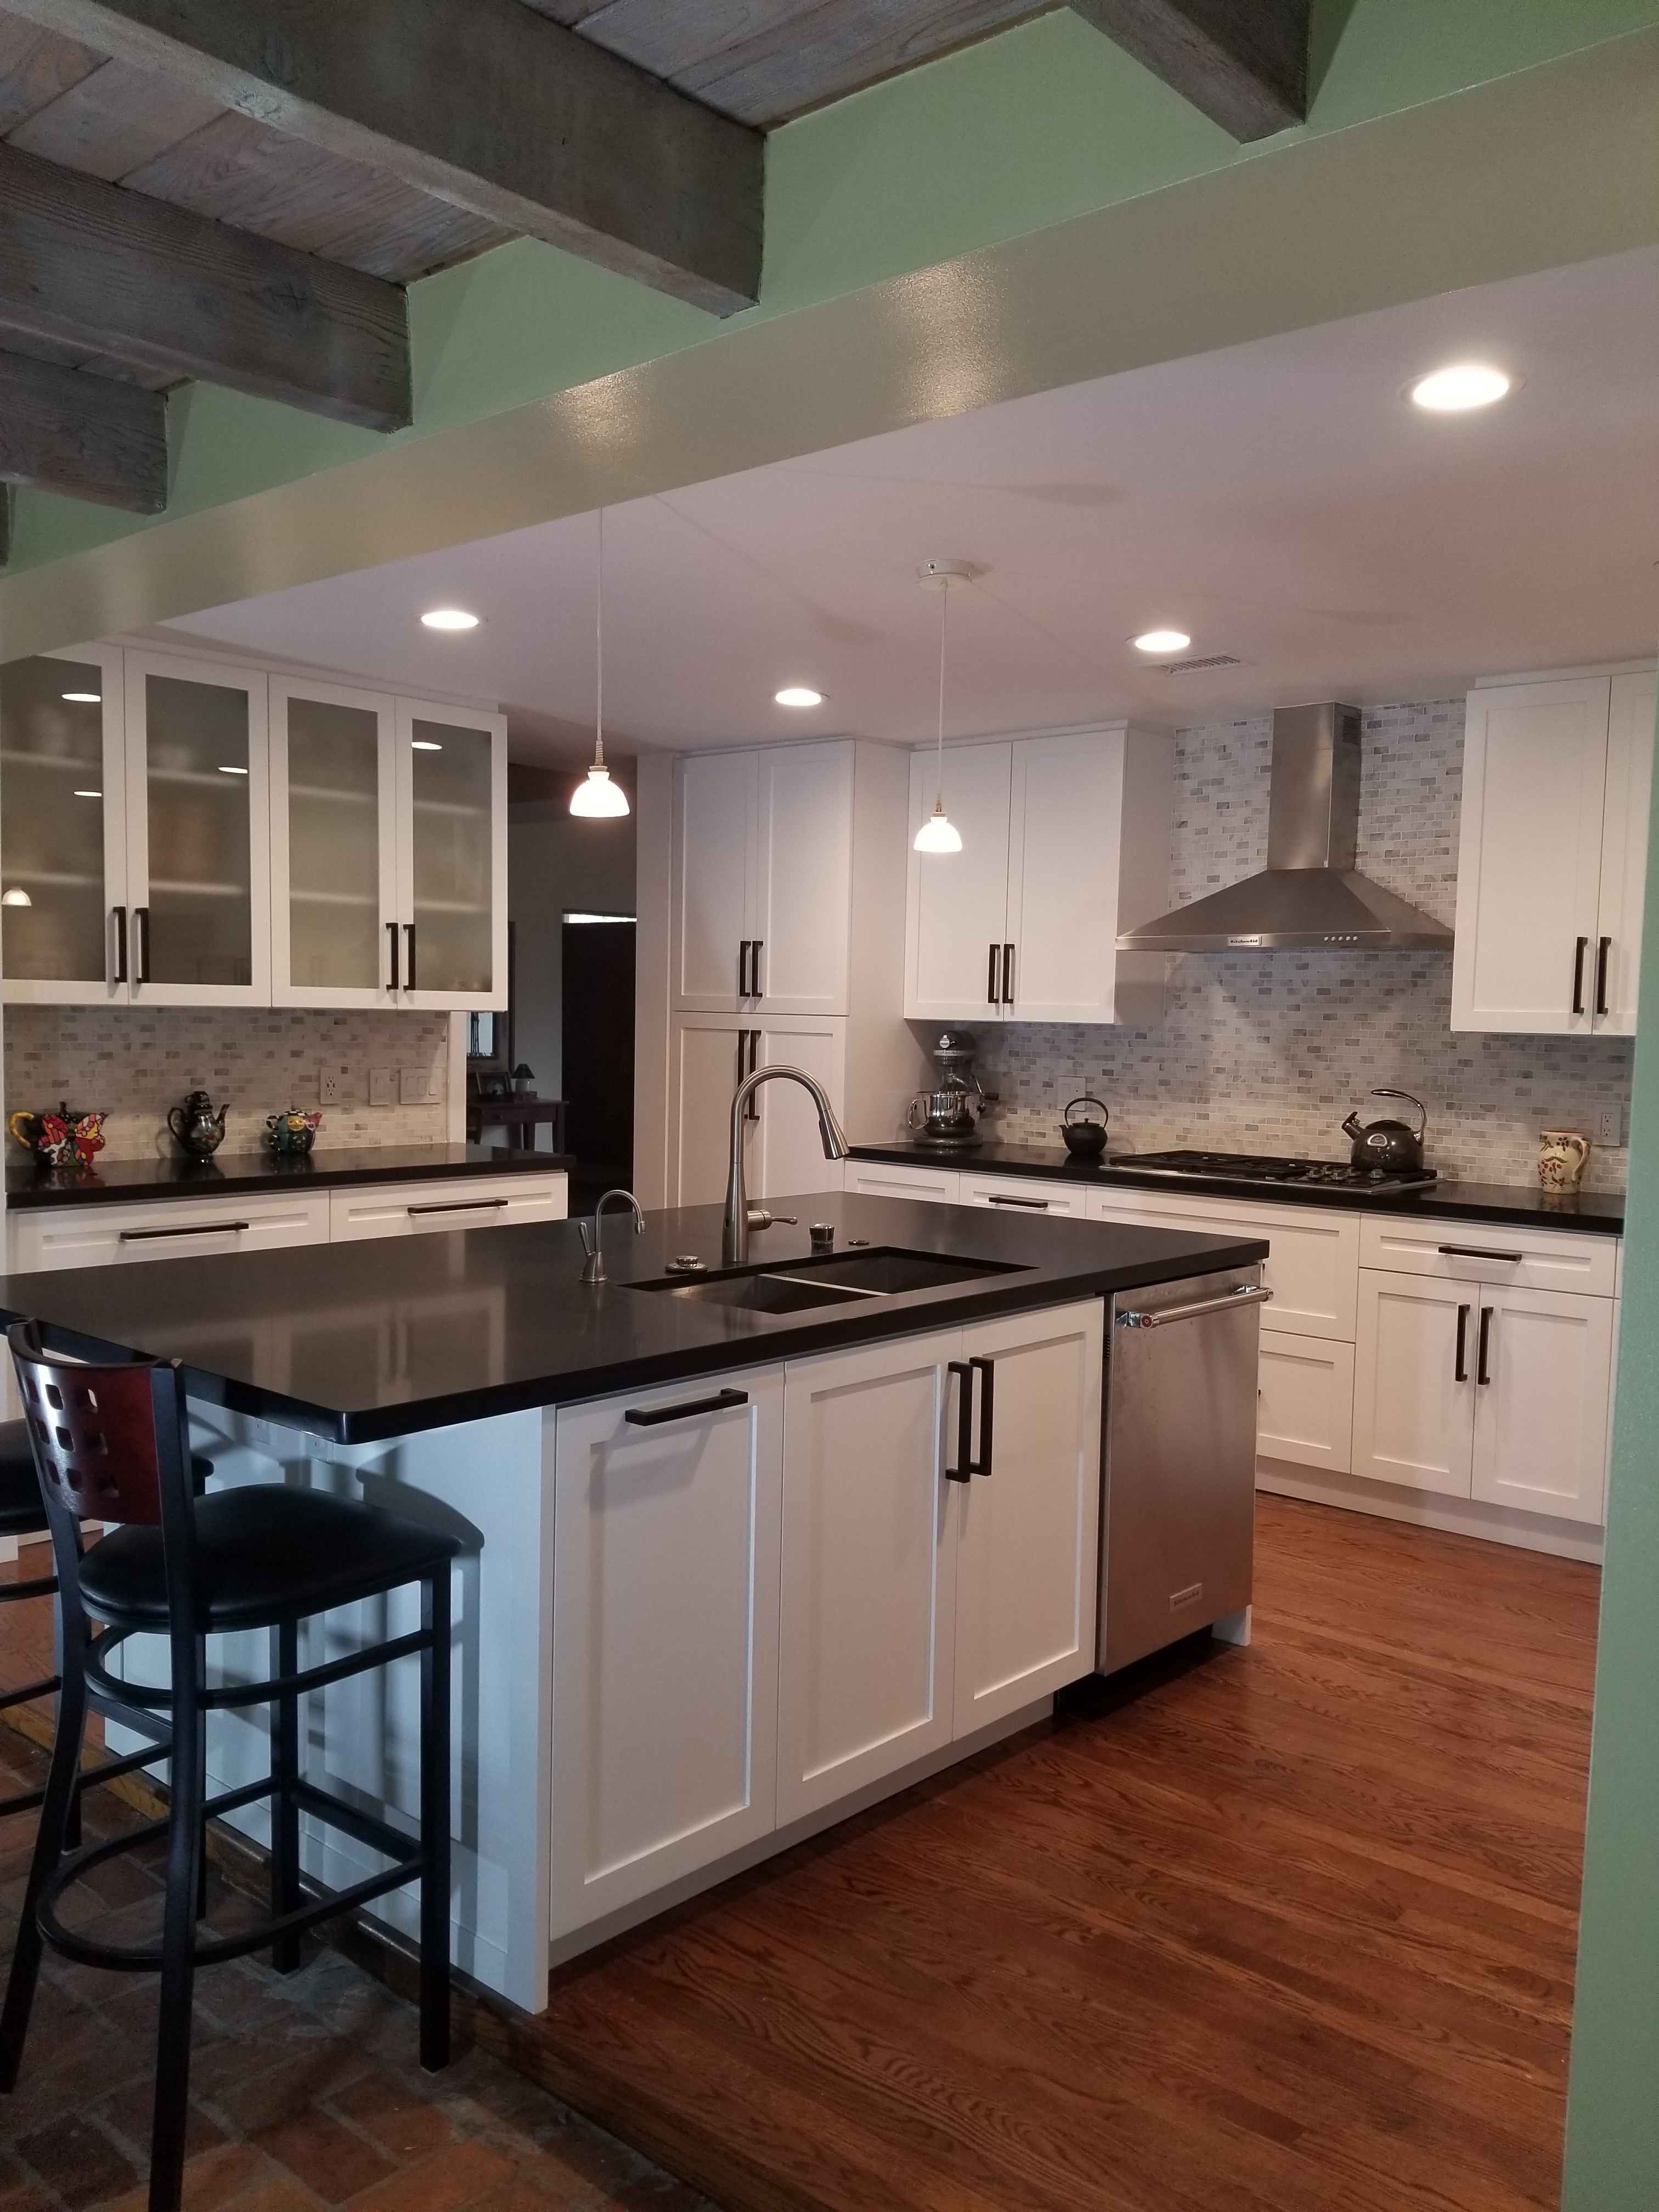 Latest Projects | New Style Kitchen Cabinets corp.